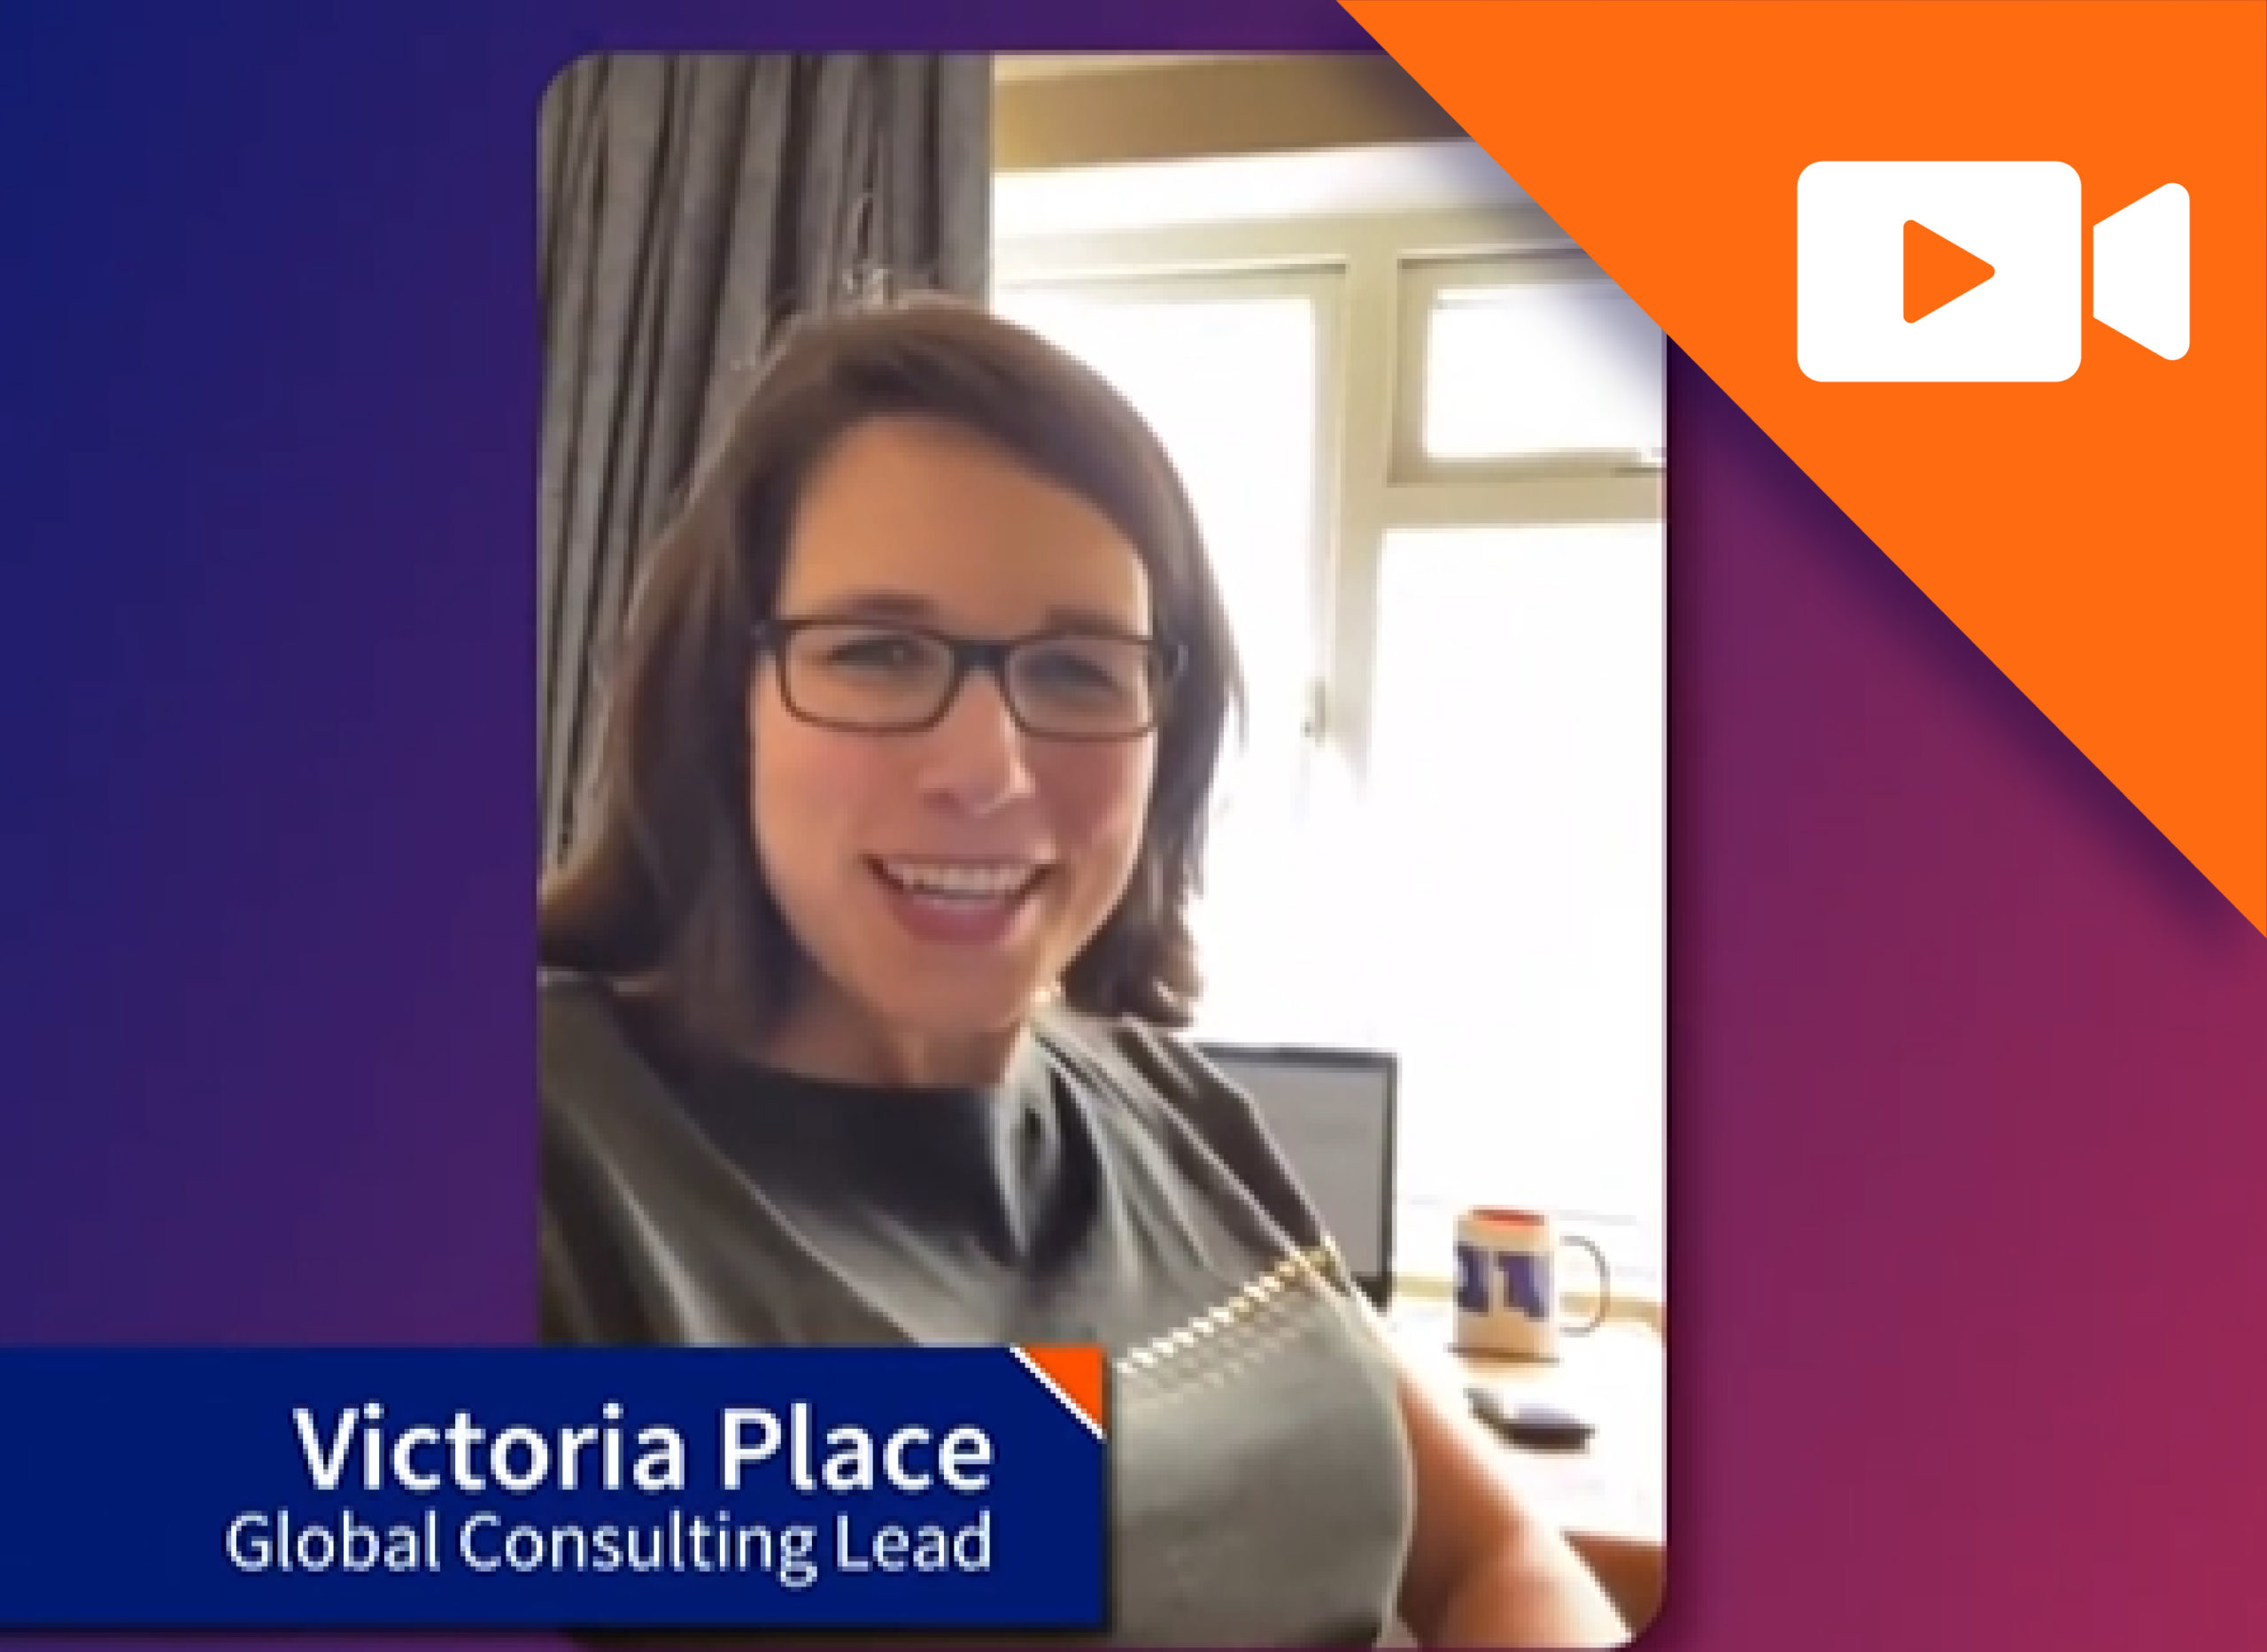 Victoria Place on REPL being a great place to work for women